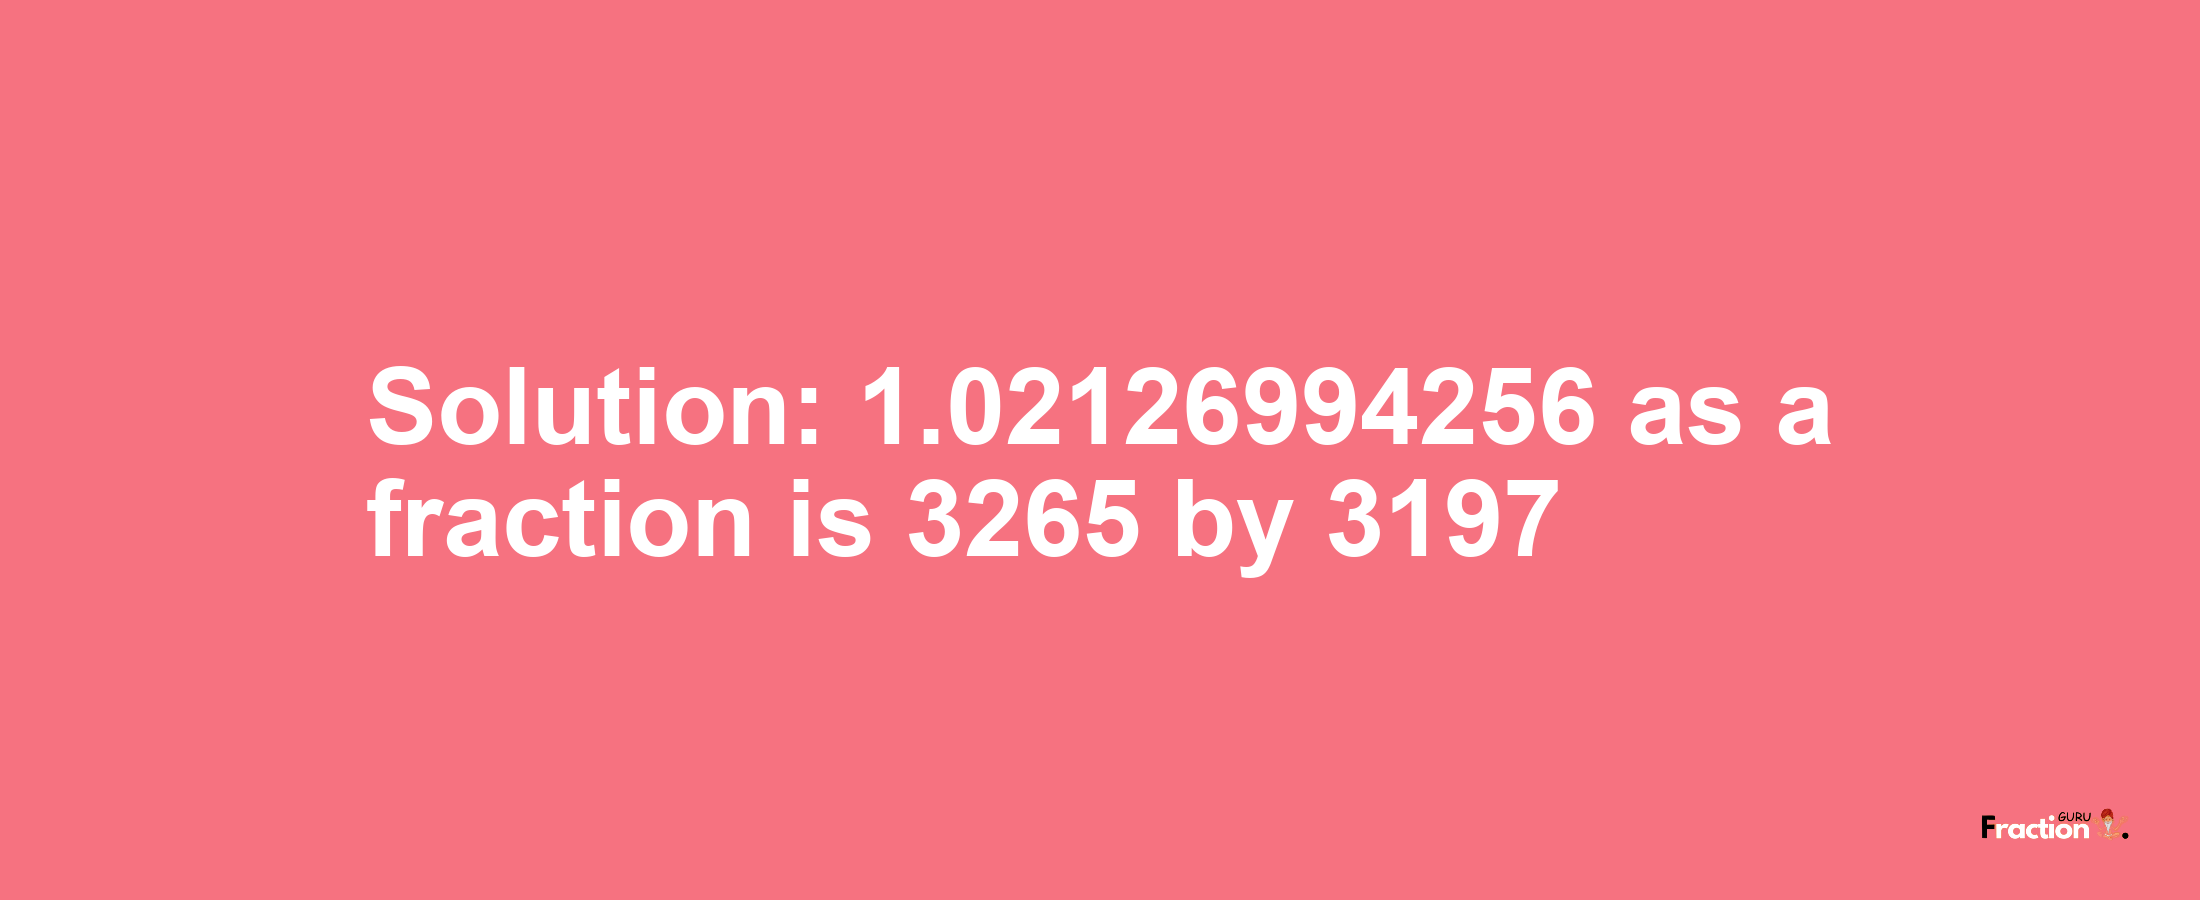 Solution:1.02126994256 as a fraction is 3265/3197